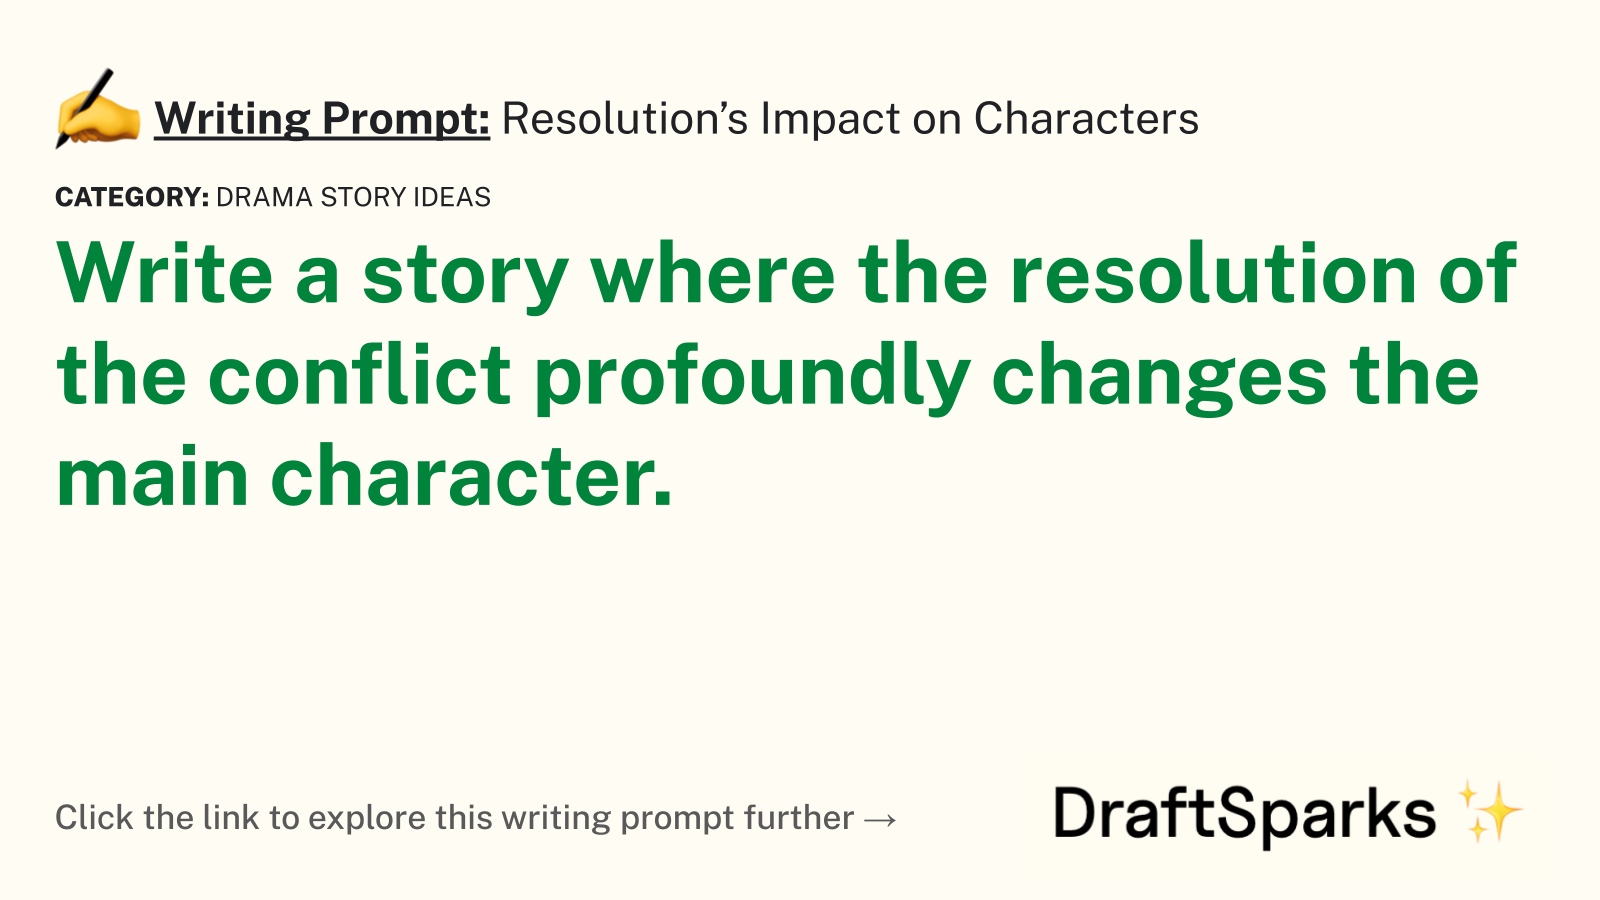 Resolution’s Impact on Characters